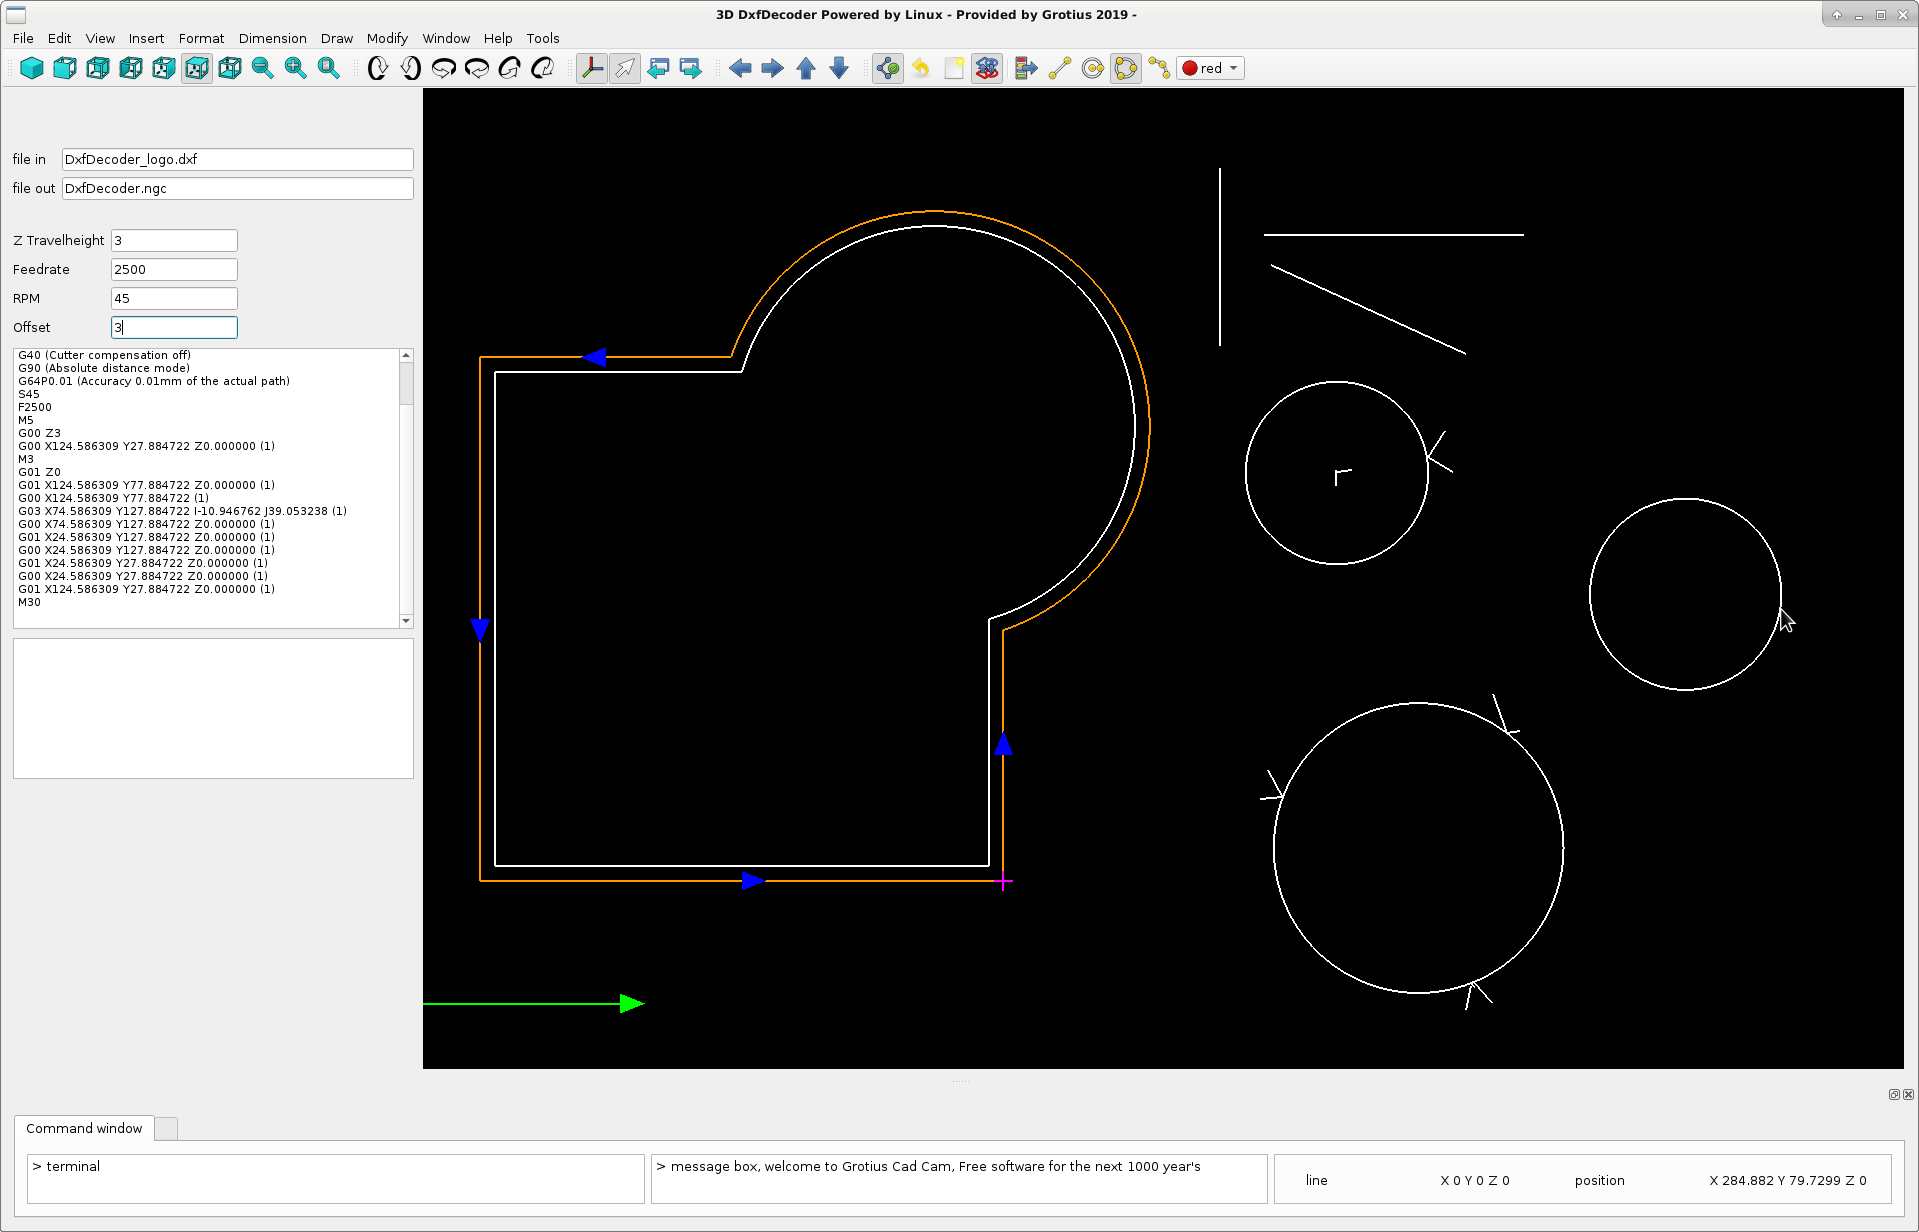 Dxf_decoder_output_2019-08-07.png